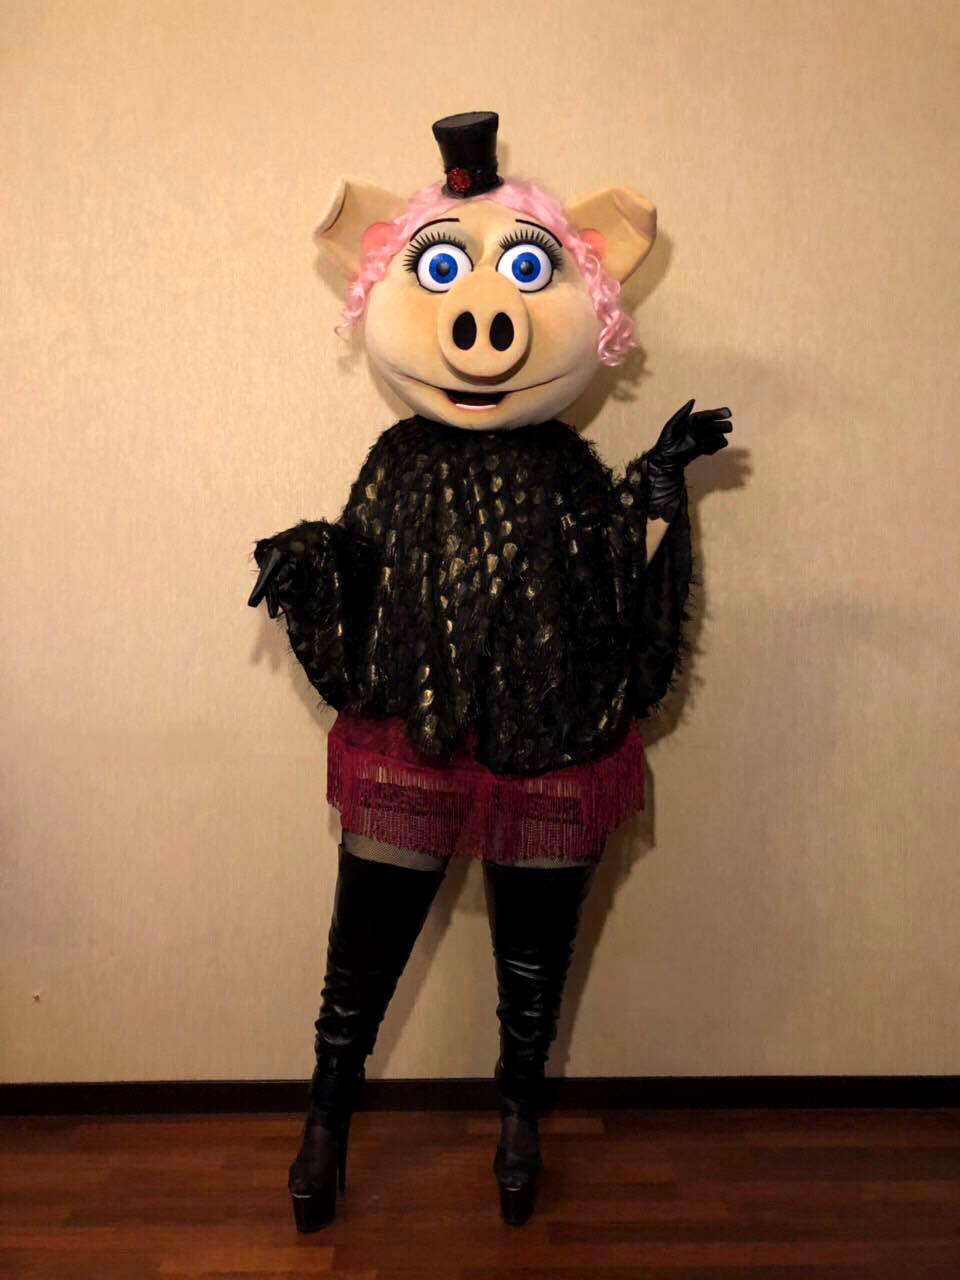 Life-size doll of a pig stripper